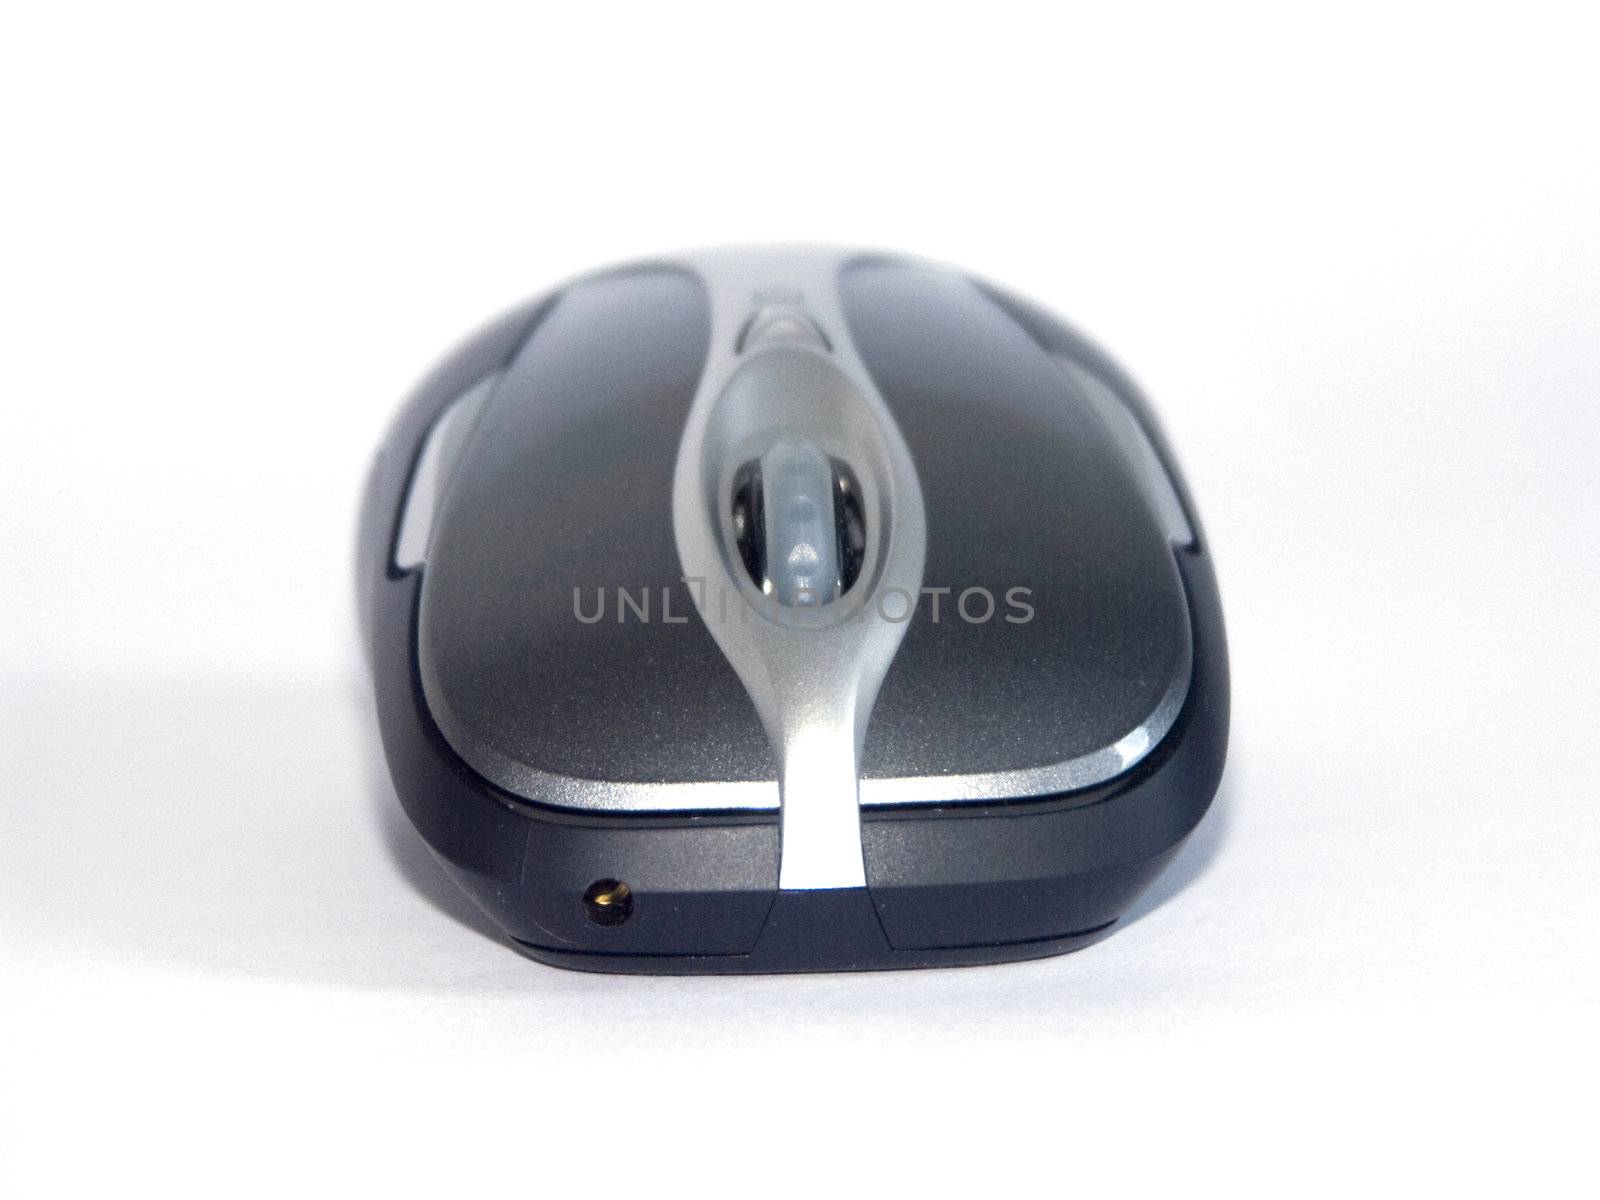 The image of the computer mouse on a homogeneous background